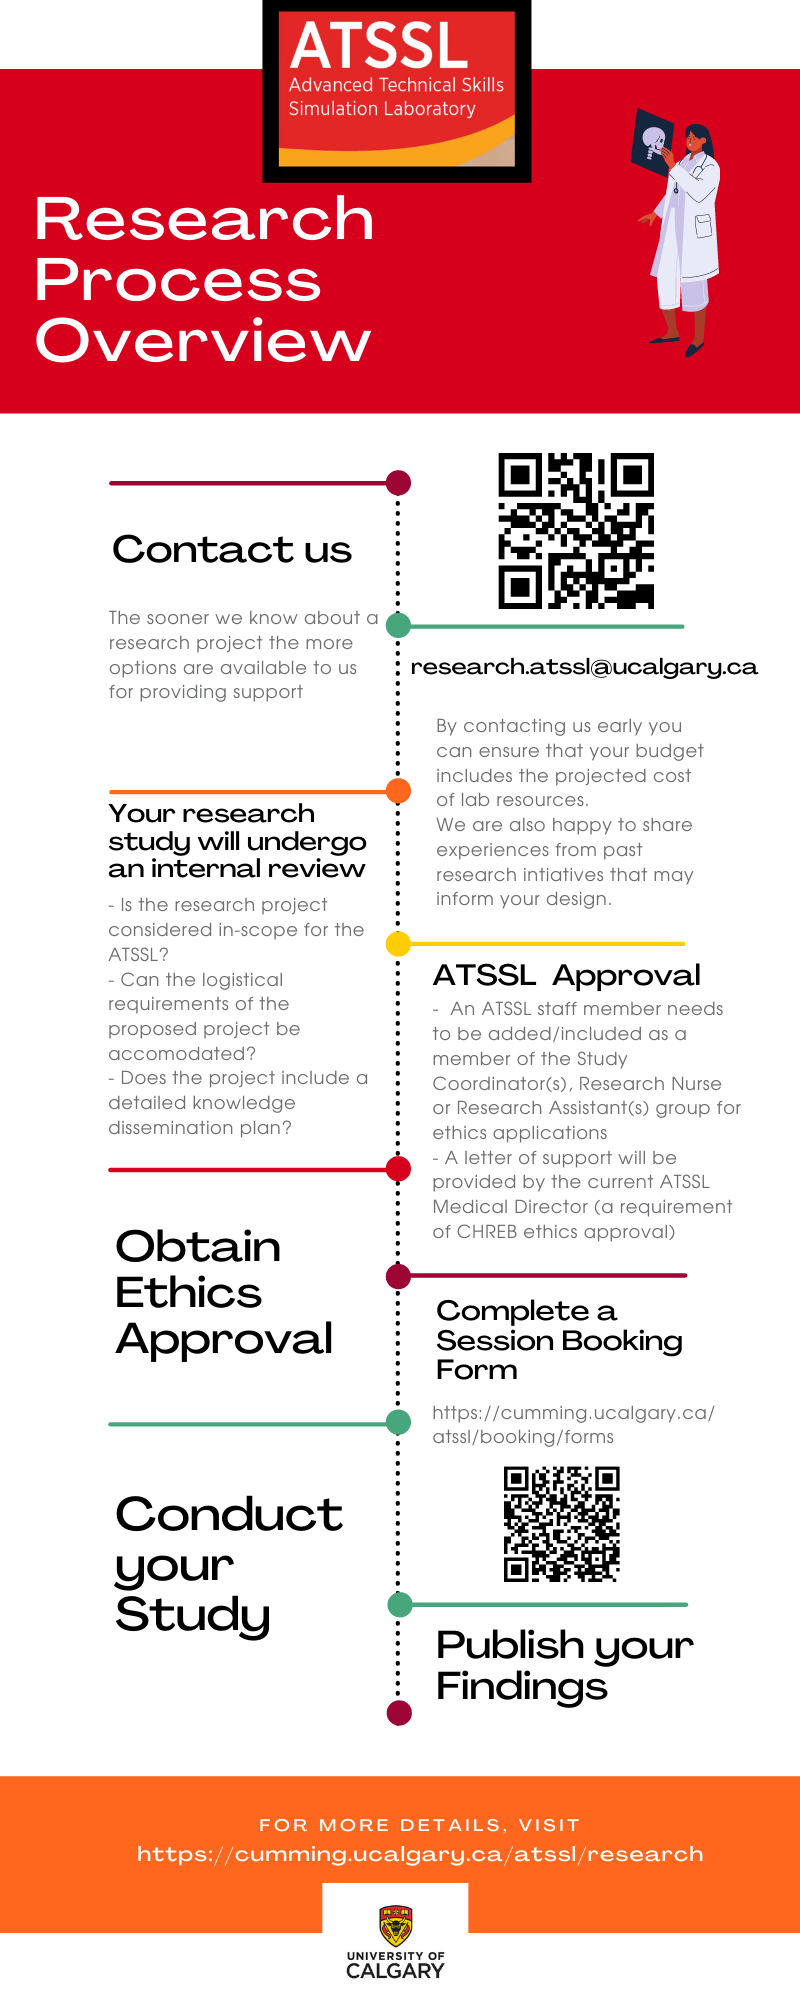 Infographic outlining the ATSSL Research Process